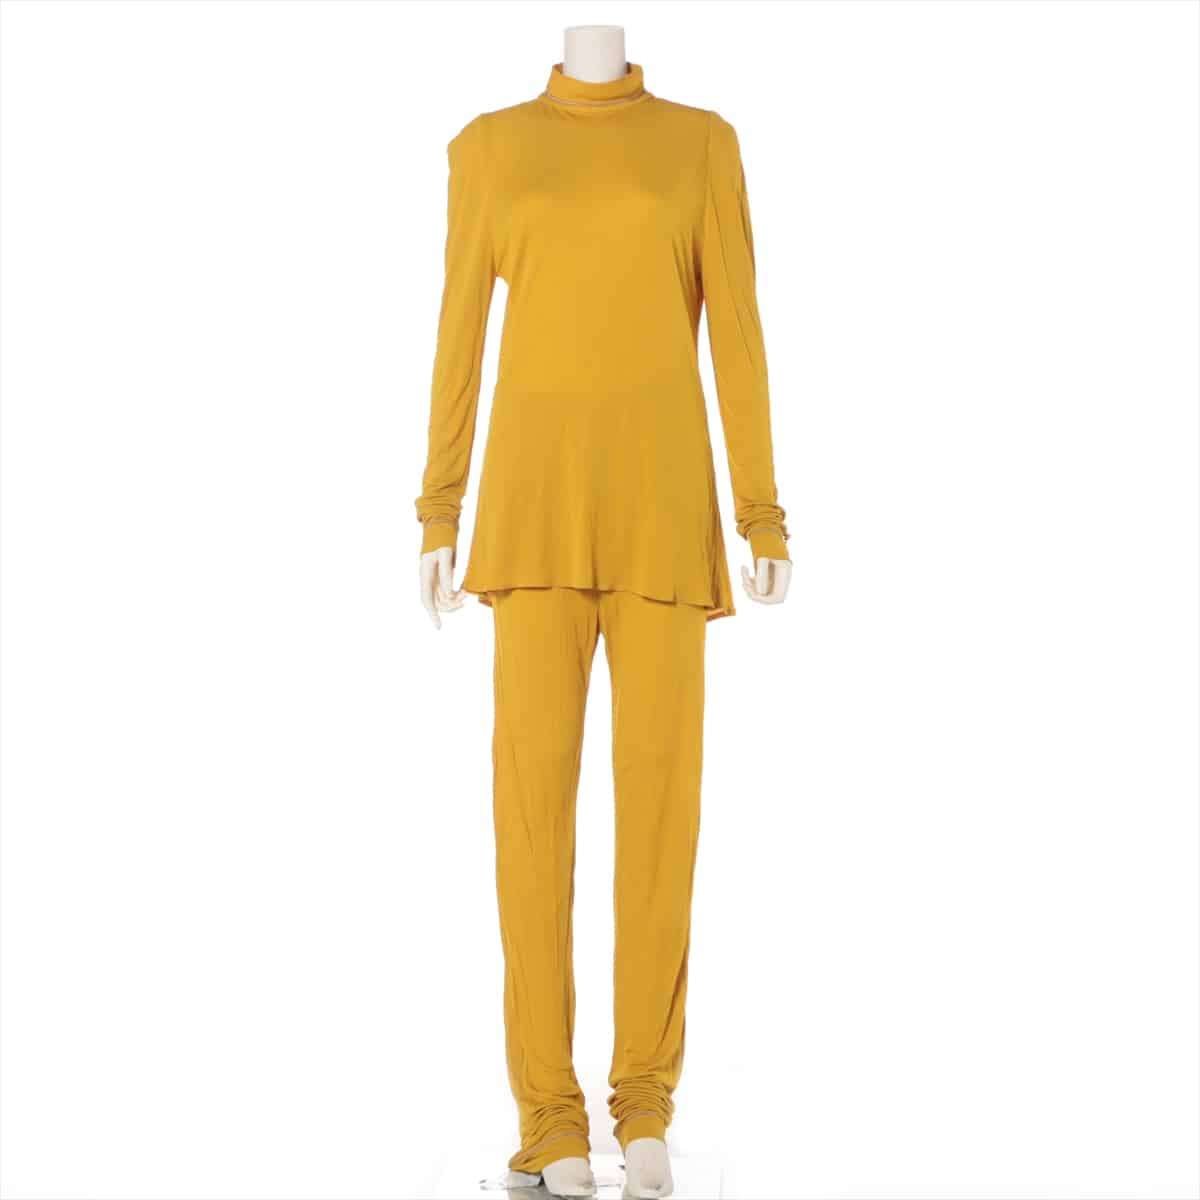 Chloe 90s Unknown material Setup 40 Ladies' Yellow No sign tag